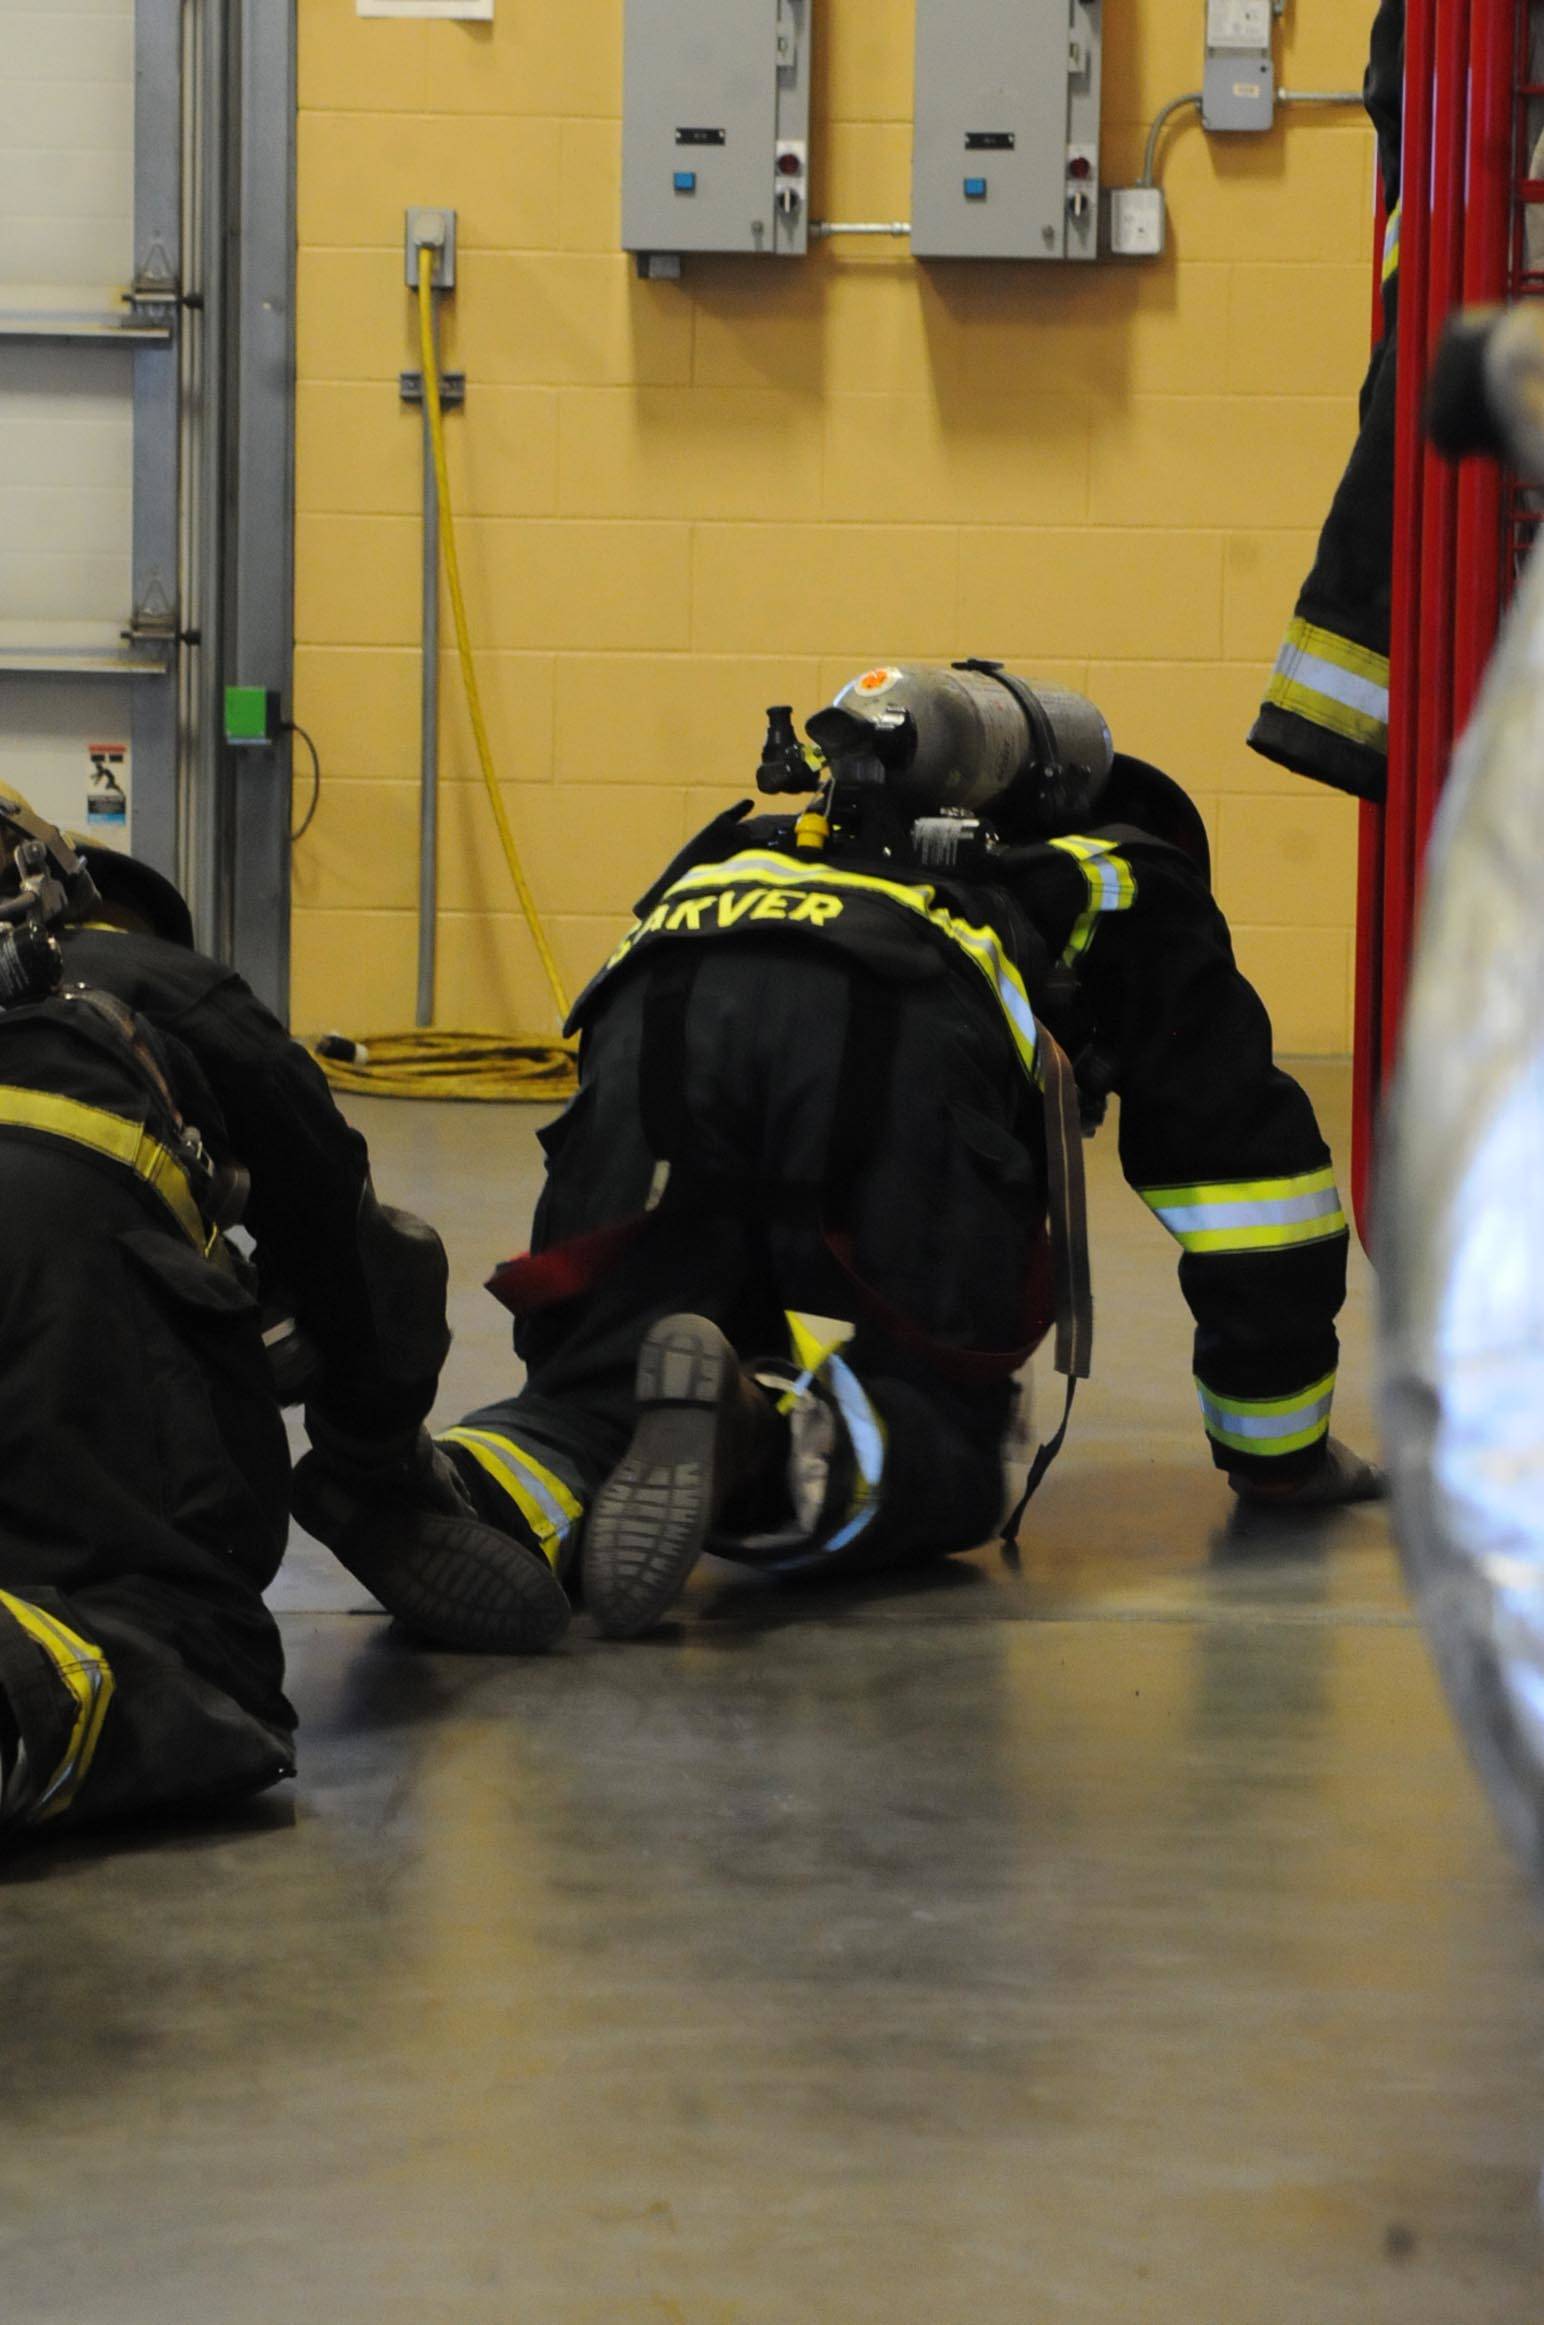 Kenai River Brown Bears player David Kaplan (right) leads a line of three players on a “right hand search” drill during a tour and training demonstration at the Kenai Emergency Operations Center on the Kenai Municipal Airport on Tuesday, Nov. 28, 2017 in Kenai, Alaska. Kenai Fire Department firefighters walked the Brown Bears players through some of the training and tools firefighters use to give them an idea of what a career in fire response is like. (Photo by Elizabeth Earl/Peninsula Clarion)